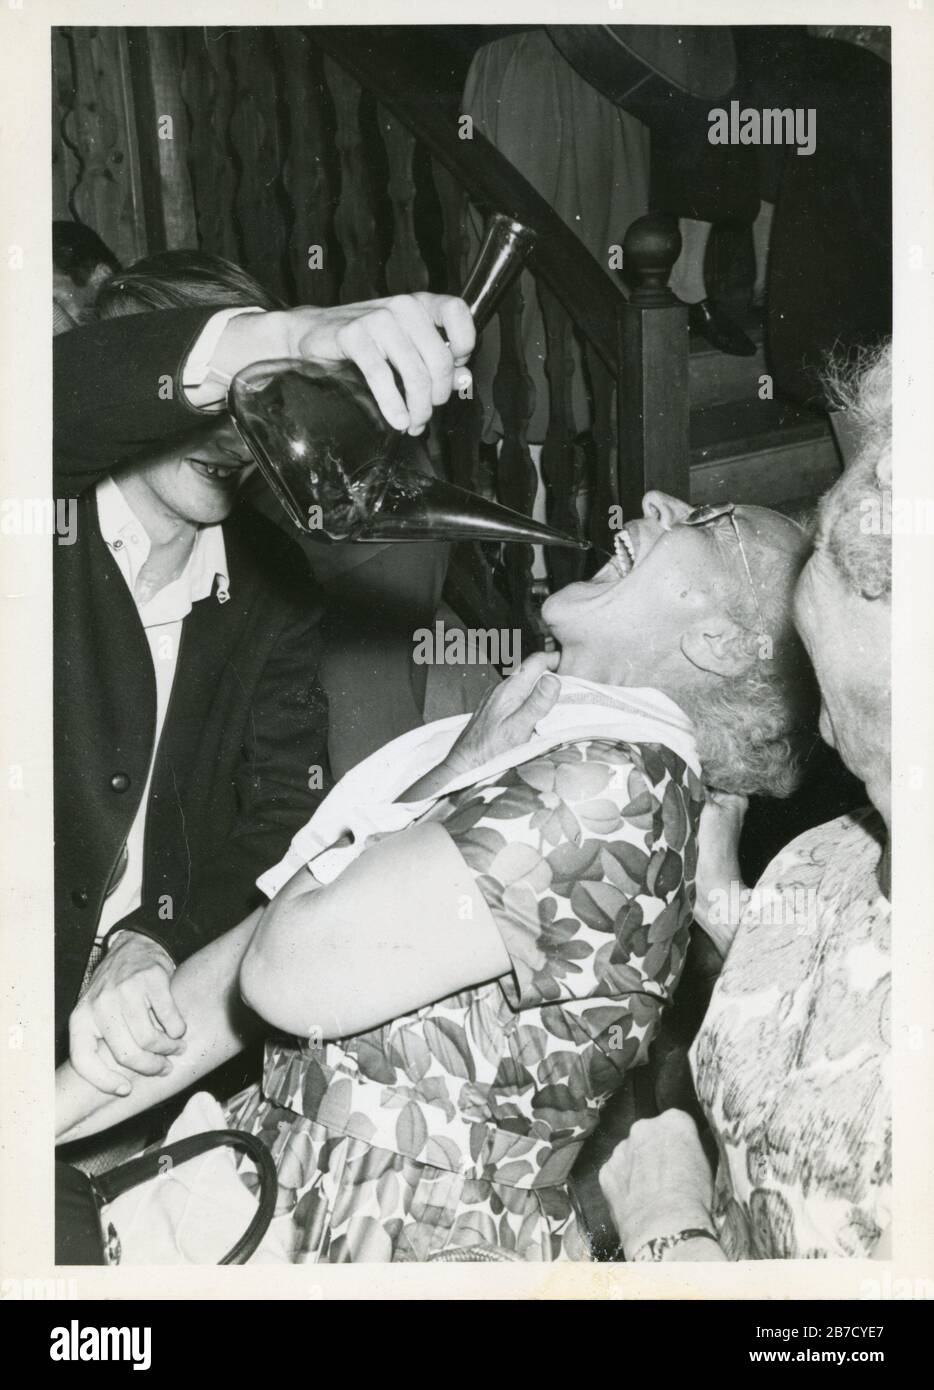 1960s black and white snapshot of an elderly lady wearing a flowery frock being forcefed wine or sangria from a porron by a young man whilst another elderly lady looks on in the foreground. Vernacular photography found photo. Photographer unknown (Richard Bradley collection) Stock Photo